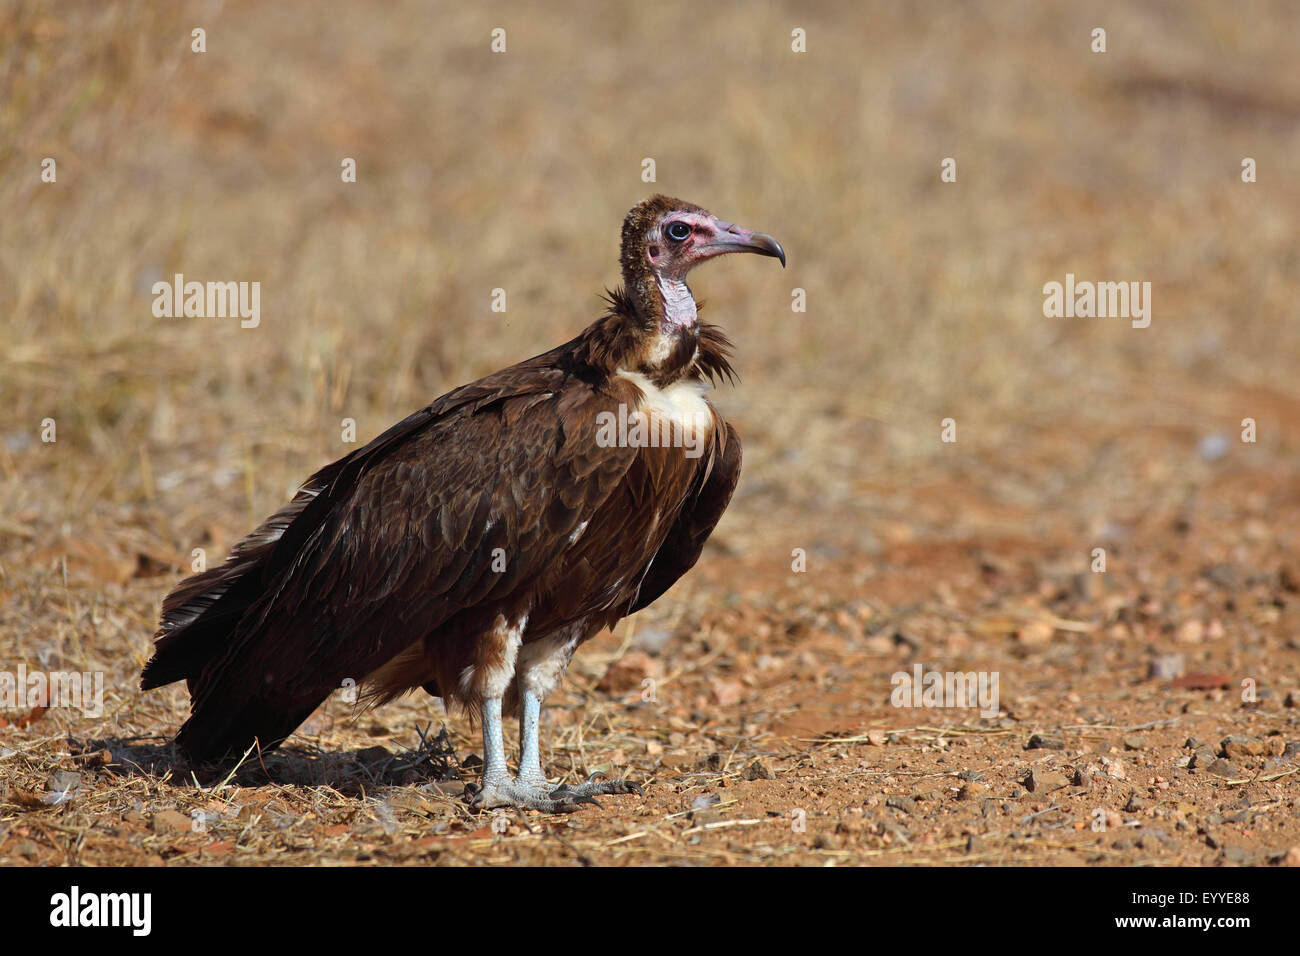 hooded vulture (Necrosyrtes monachus), standing on the ground, South ...